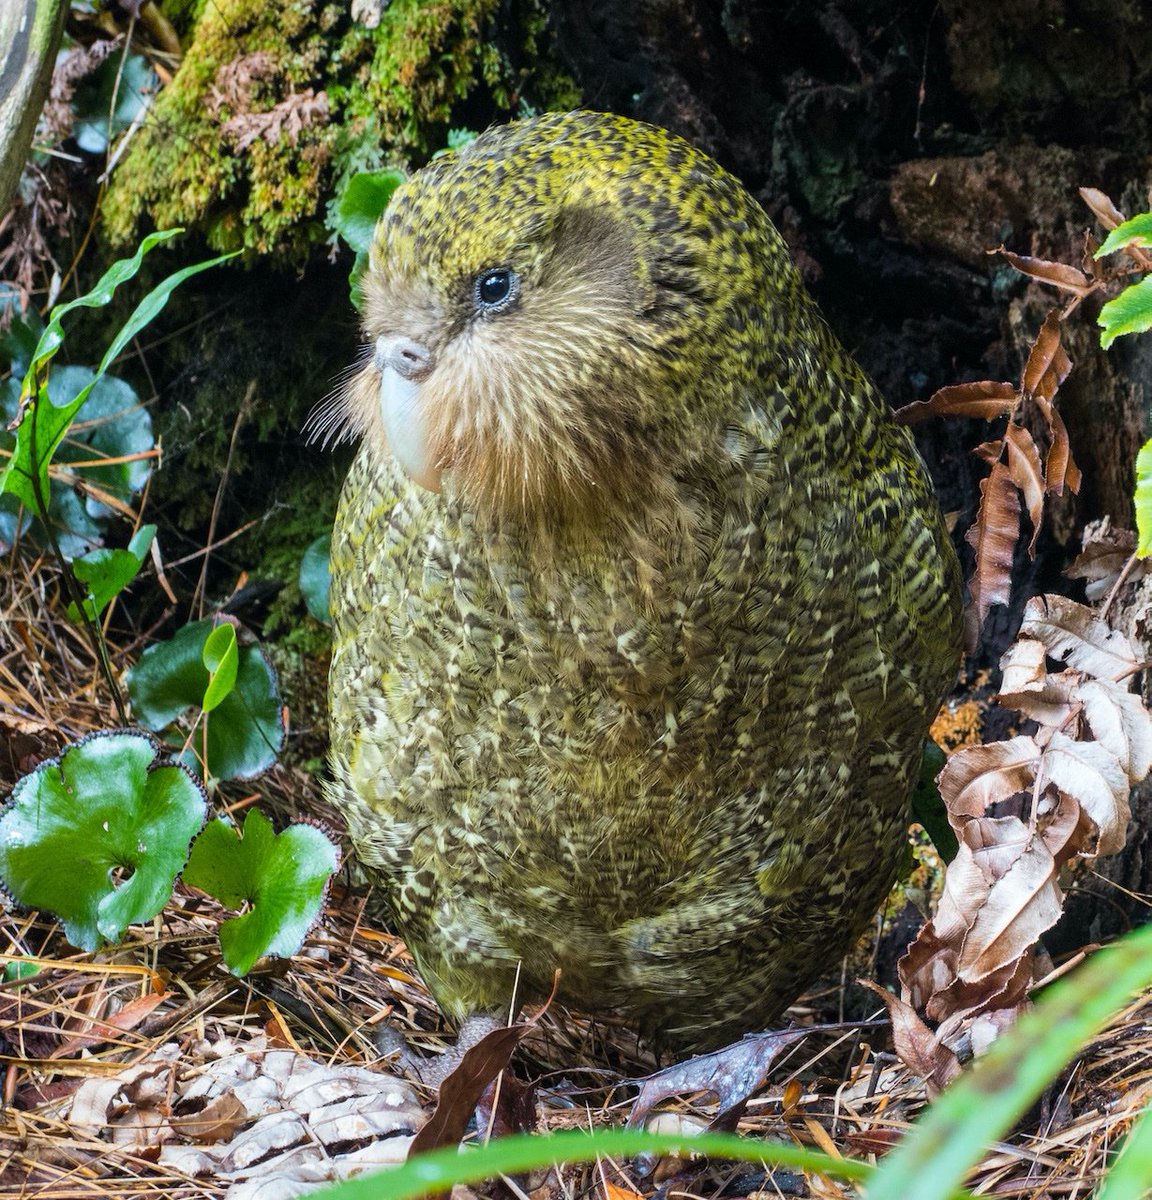 Richard Henry almost singled-handedly transferred 100s of  #kakapo and  #kiwi to the (relative) safety of Resolution Island. Our efforts are insignificant next to his, but next year we hope to complete what he started by returning kākāpō to the very same place.  #conservation